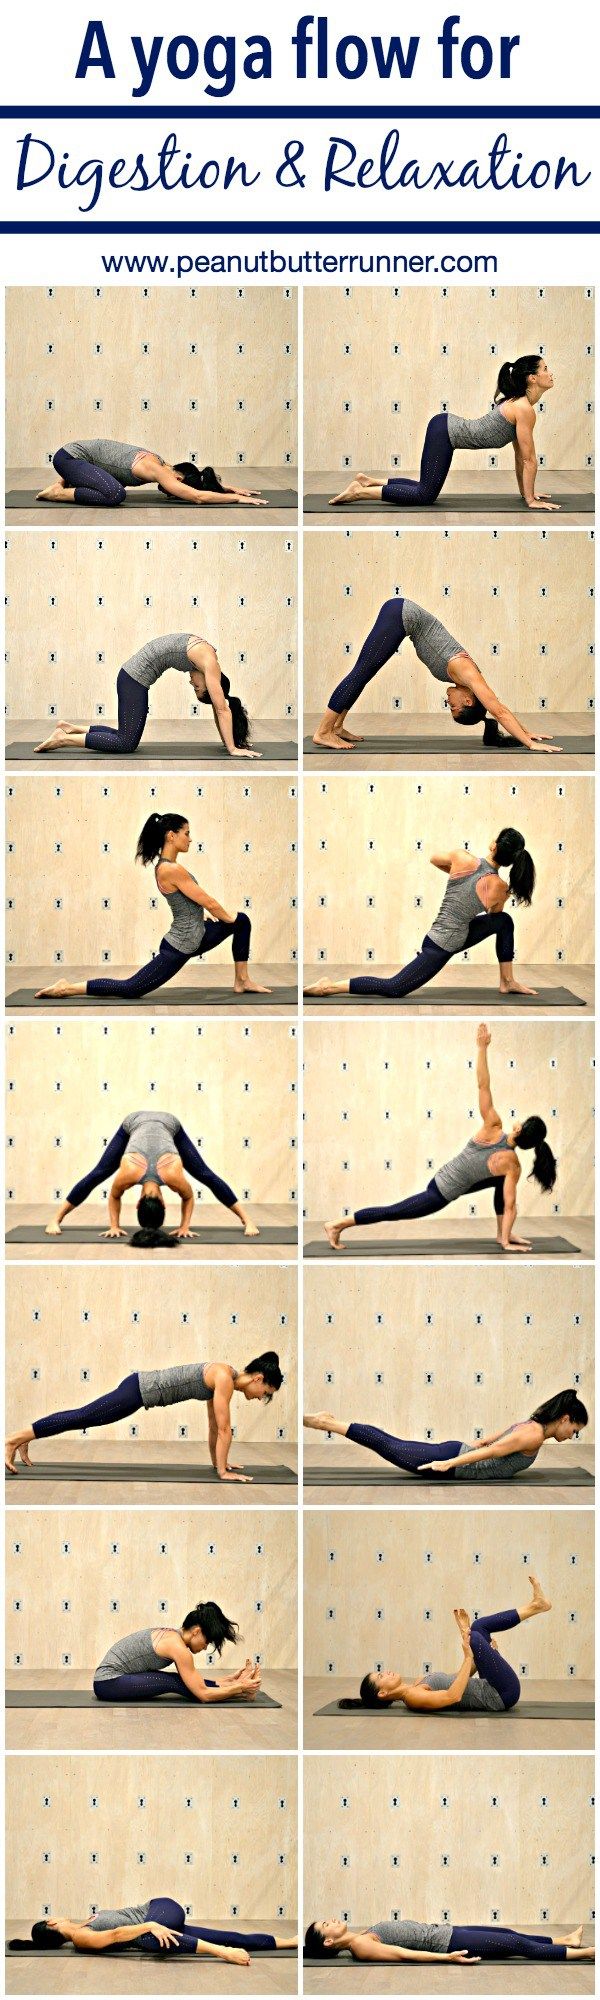 A yoga flow to support digestive health and to promote relaxation.